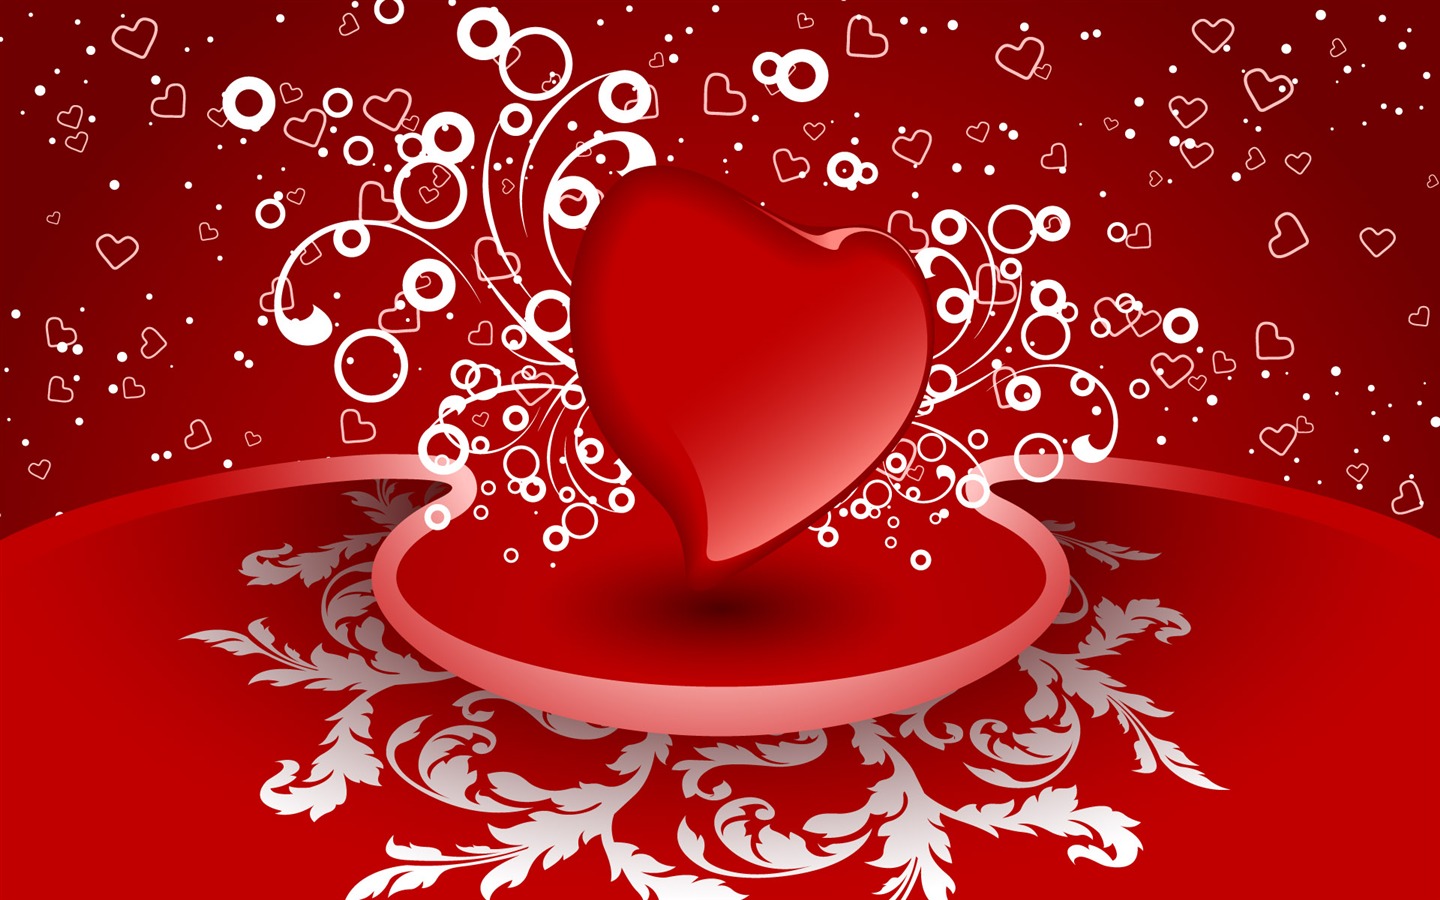 Valentine's Day Love Theme Wallpapers (2) #8 - 1440x900